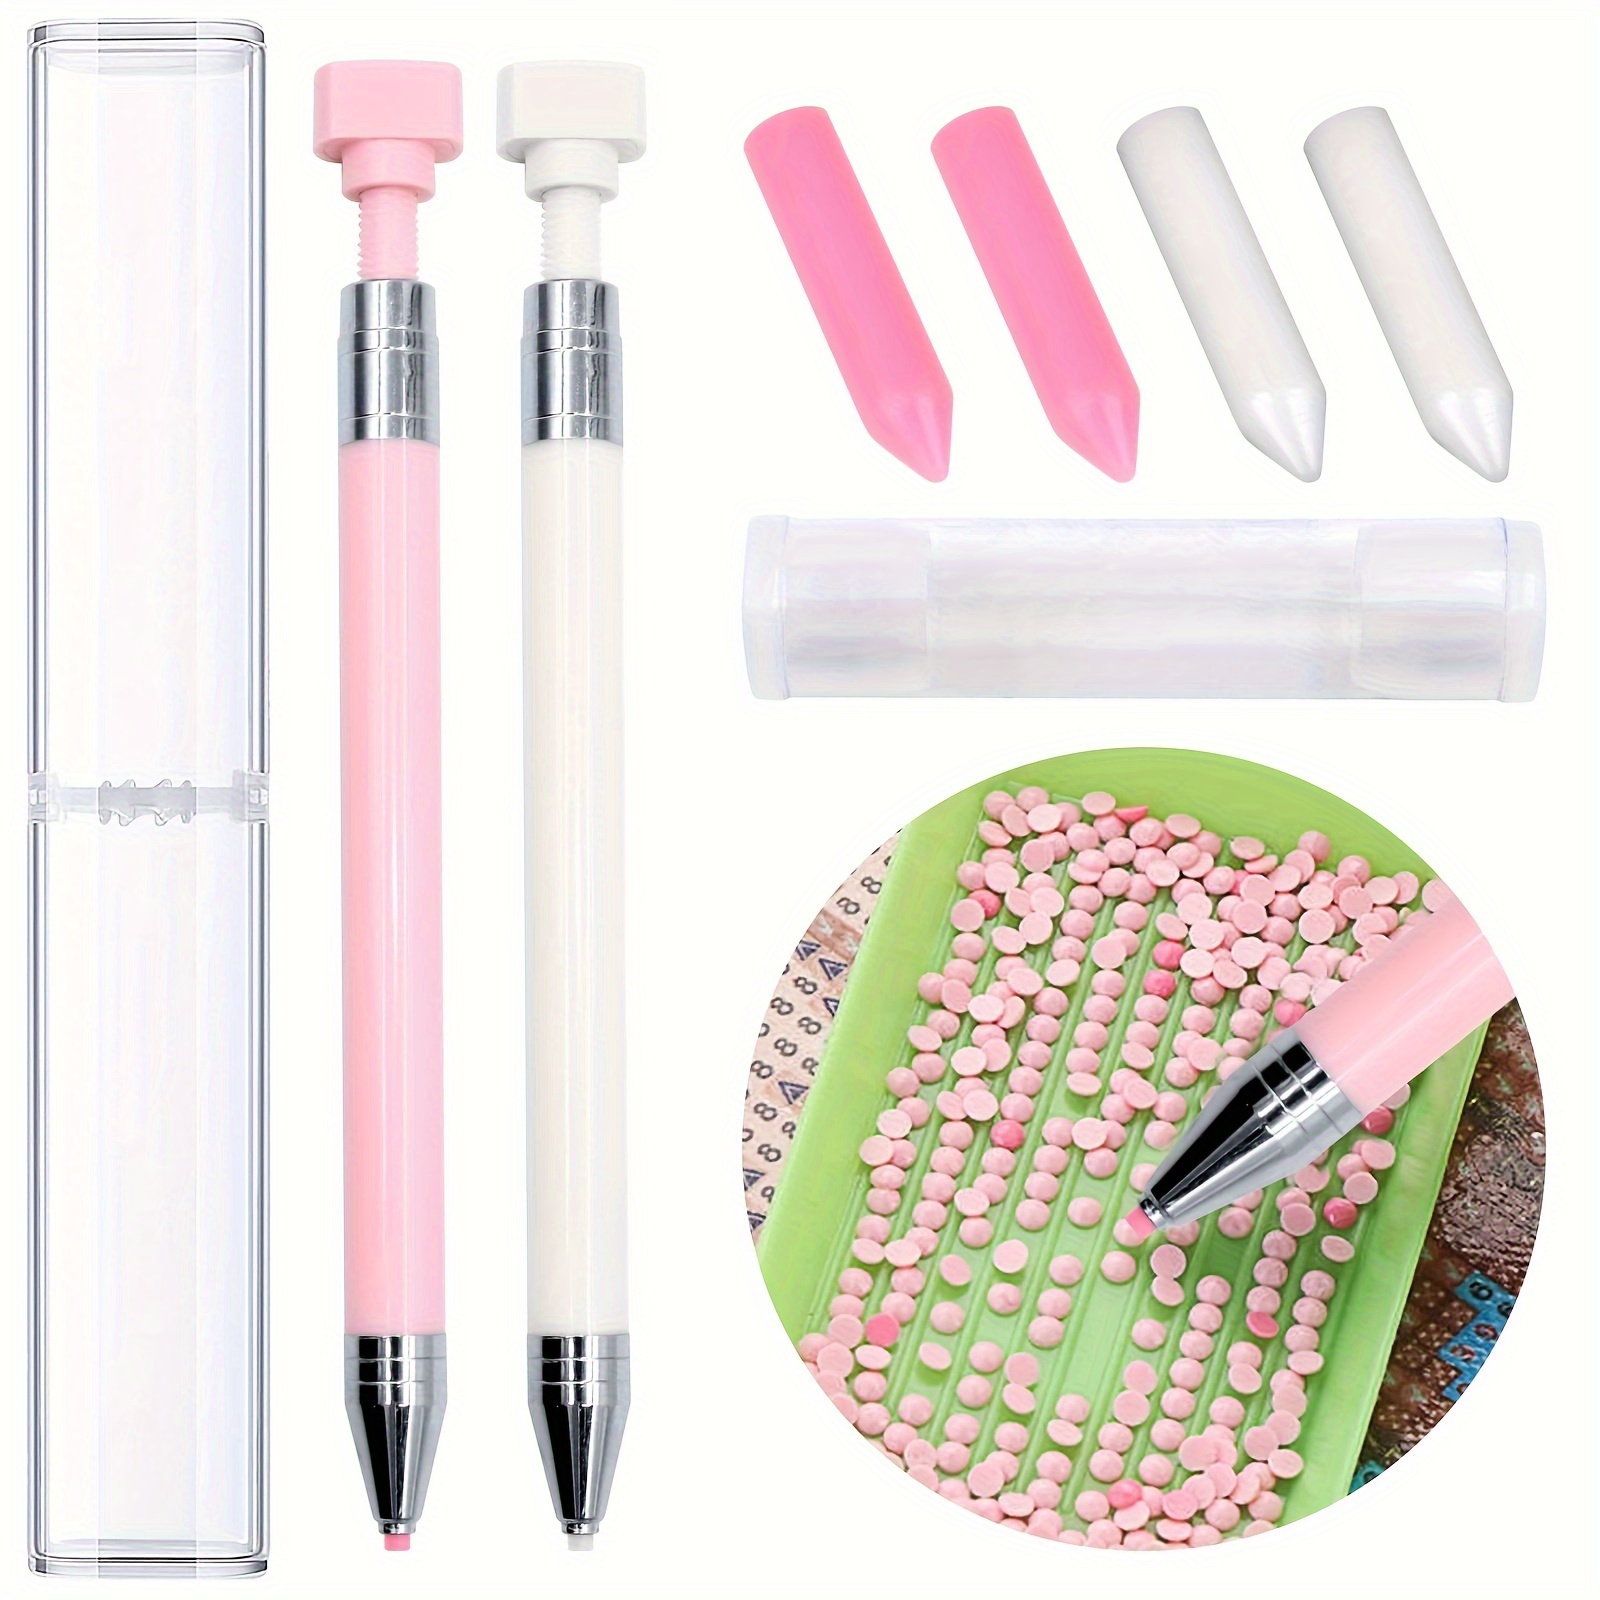 14pcs Diamond Painting Pen Accessories Tools Set, Exquisite Stainless Steel Metal Pen Tips,Ergonomic Diamond Art Drill Pen and 6 Painting Glue Clay